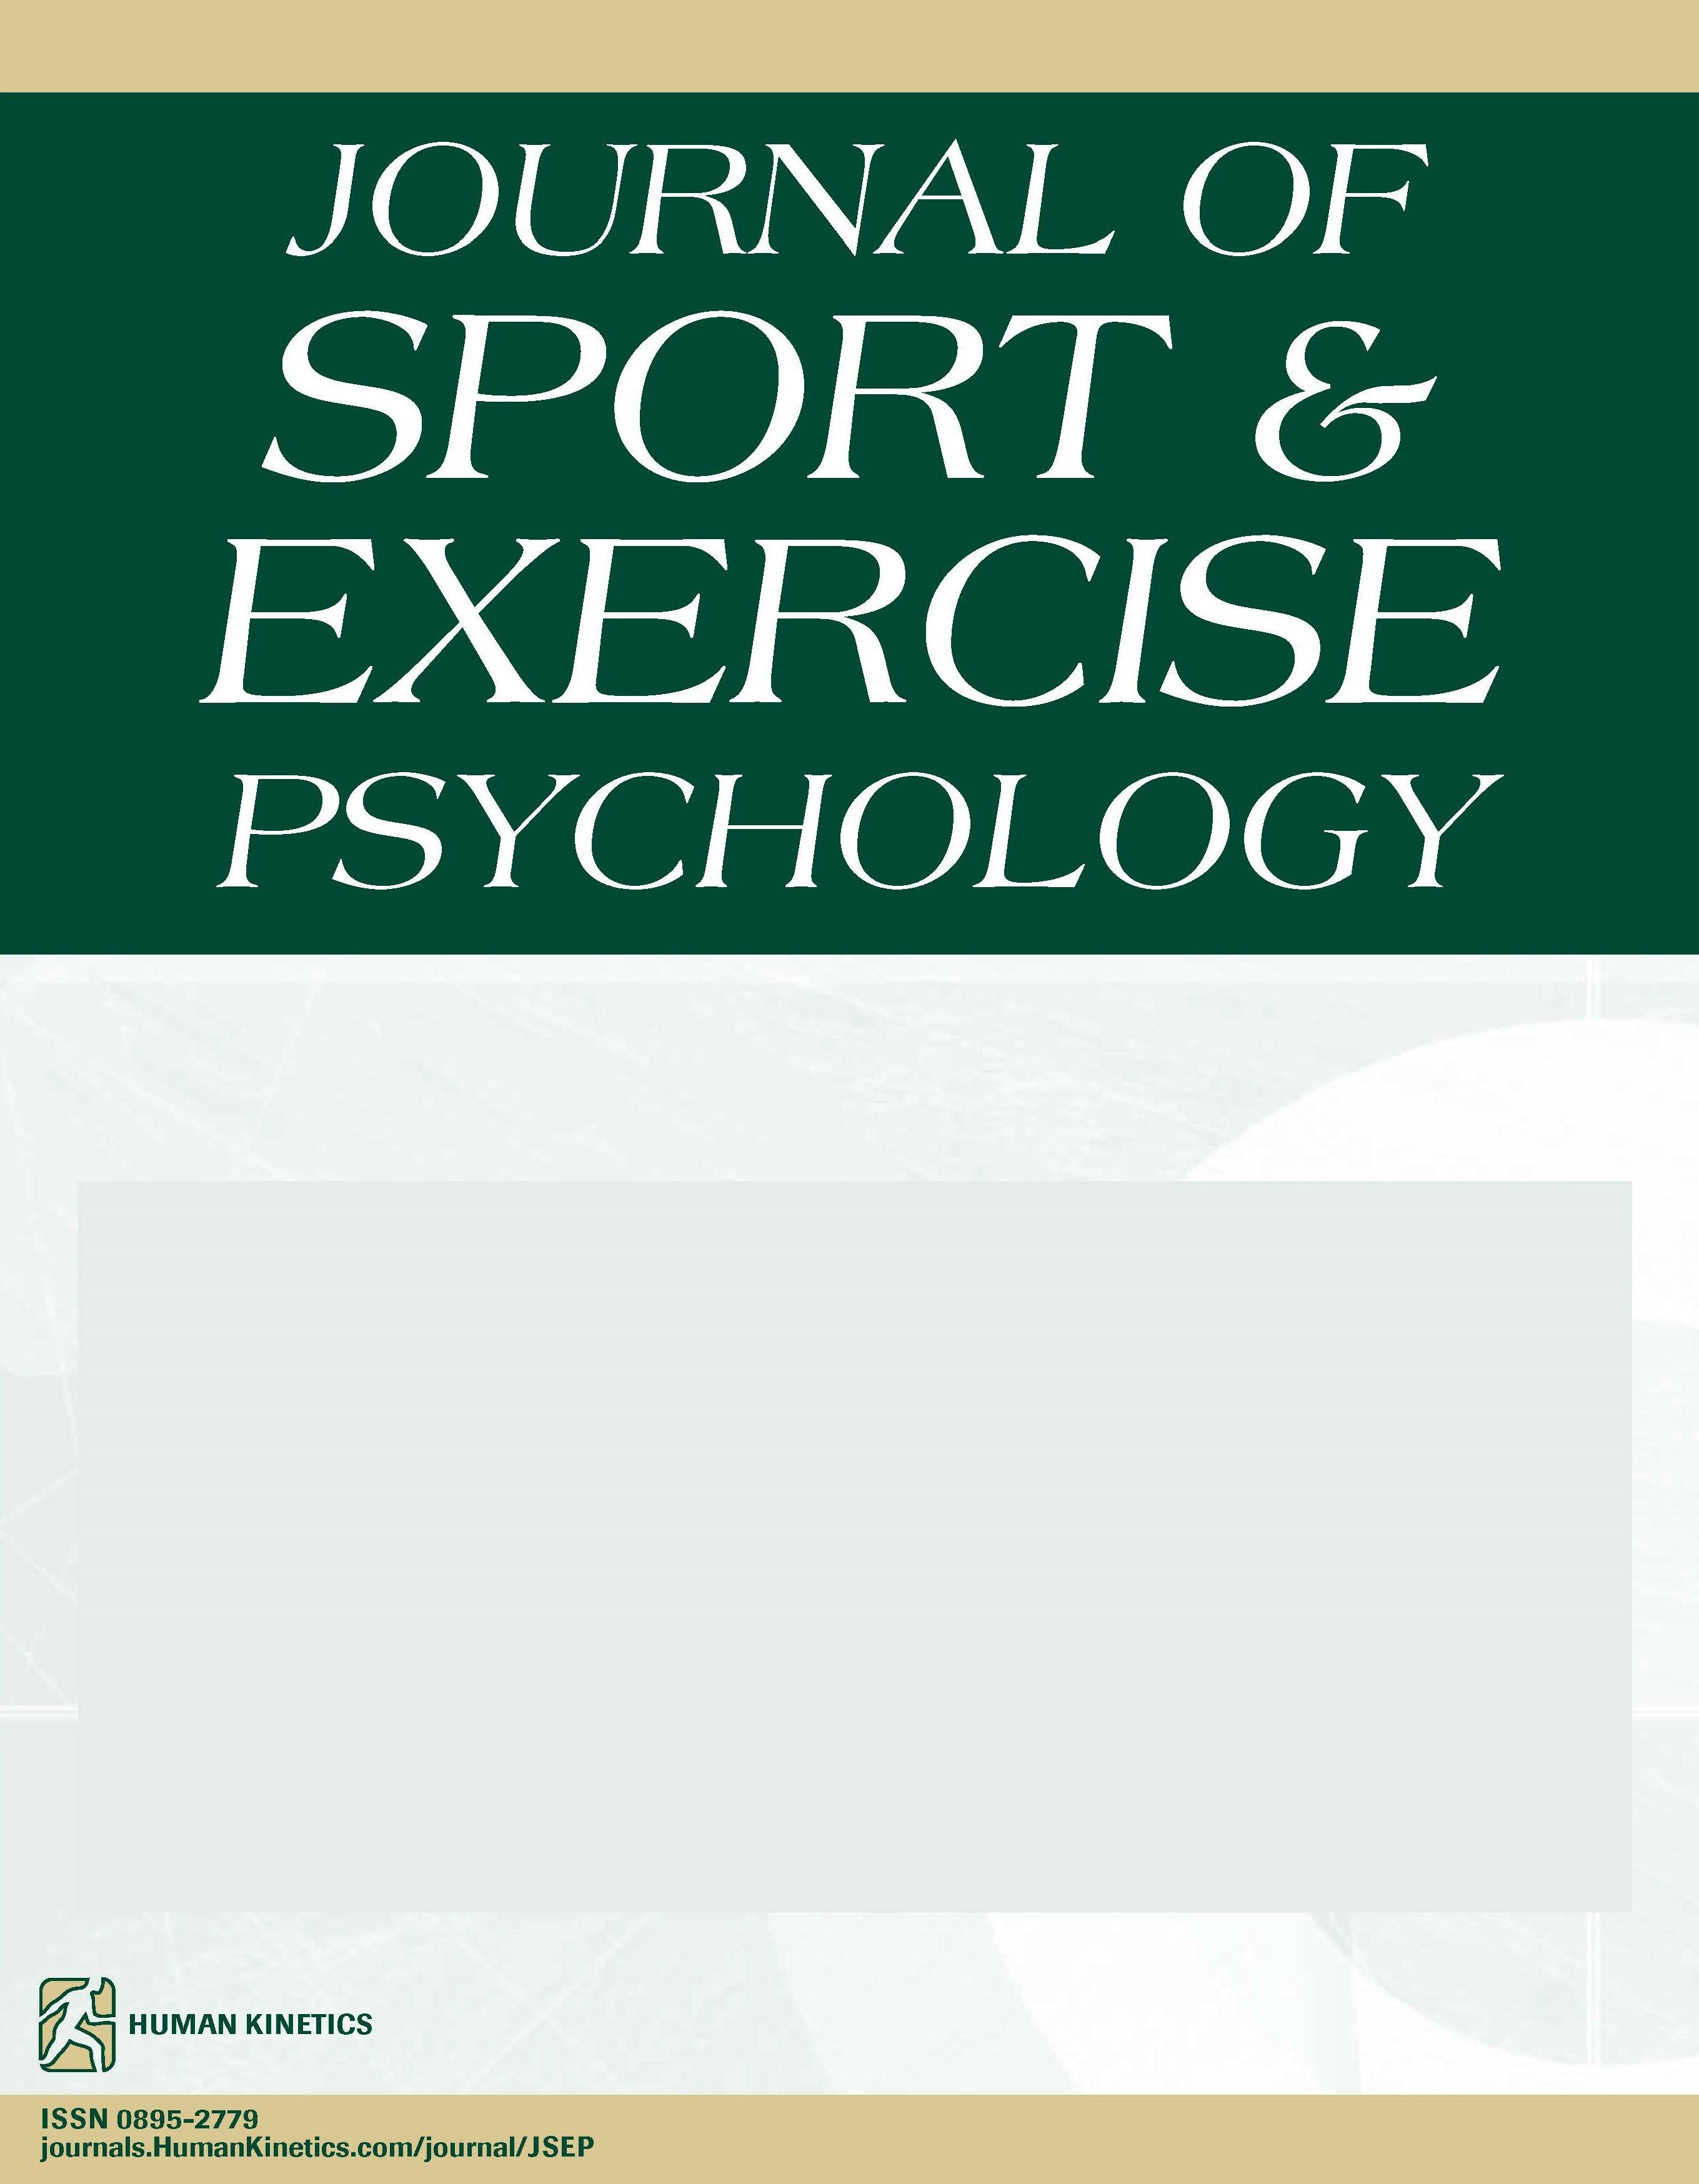 The Relationship of Resilience, Self-Compassion, and Social Support to Psychological Distress in Women Collegiate Athletes During COVID-19